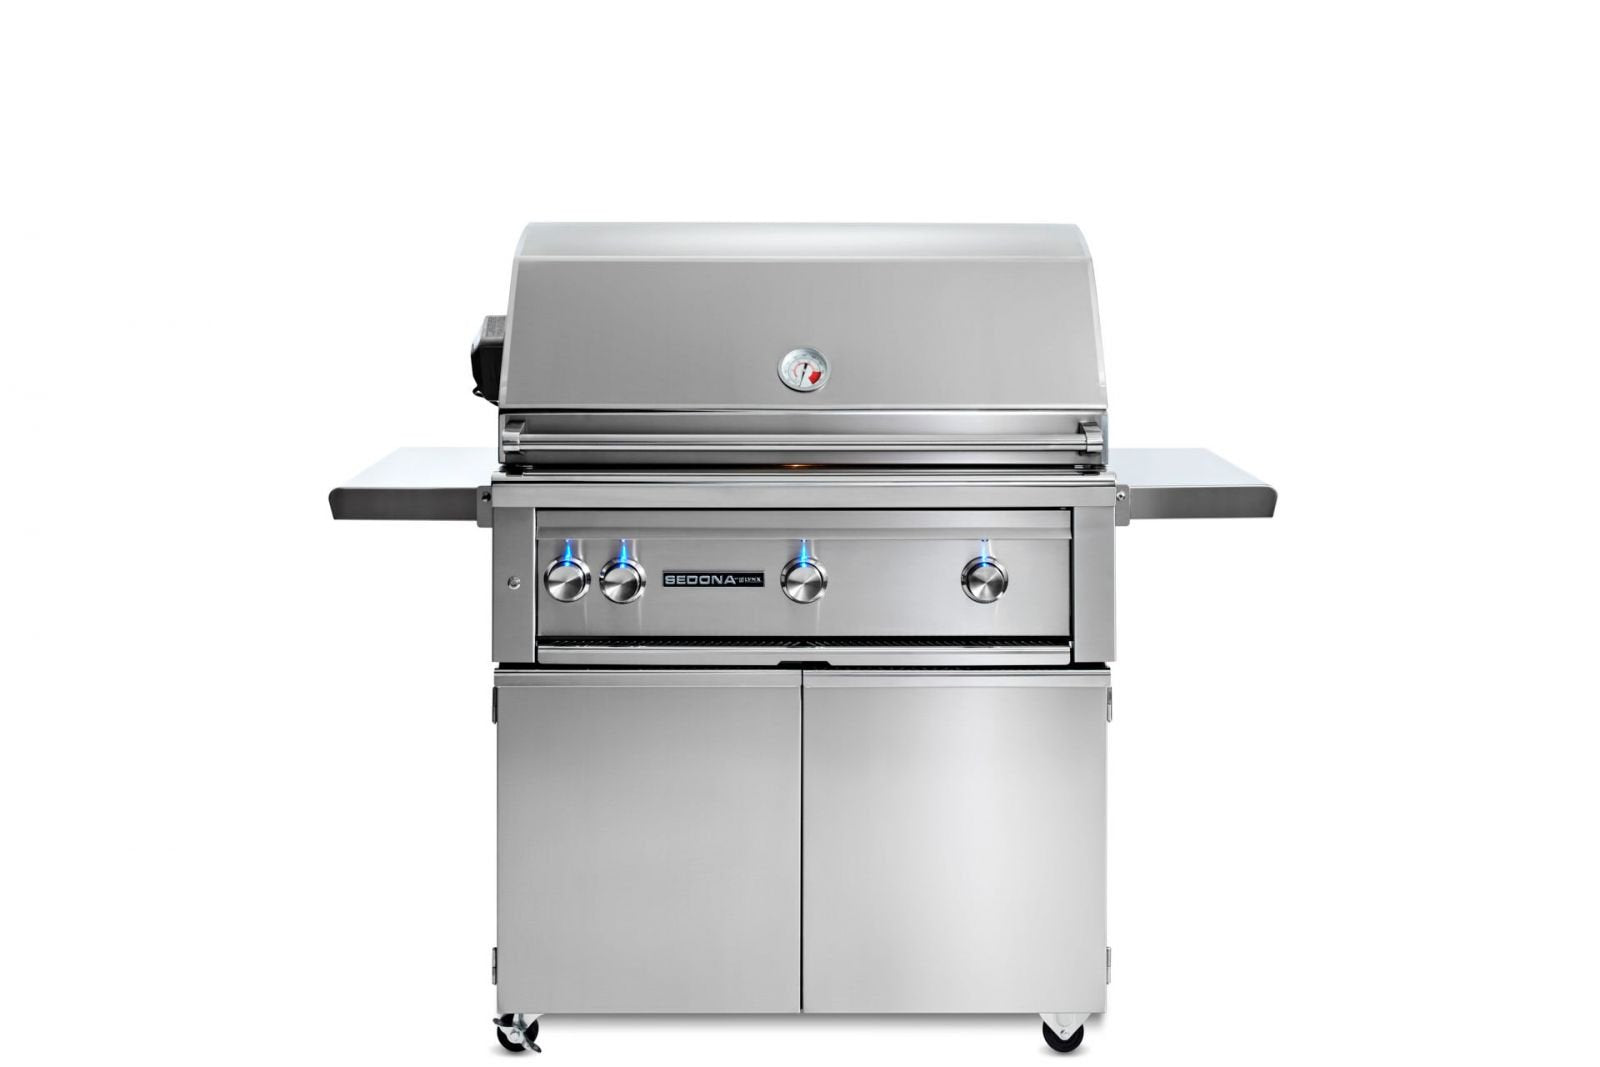 36" Freestanding Grill with 1 Prosear Infrared Burner and 2 Stainless Steel Burners and Rotisserie (L600PSFR)